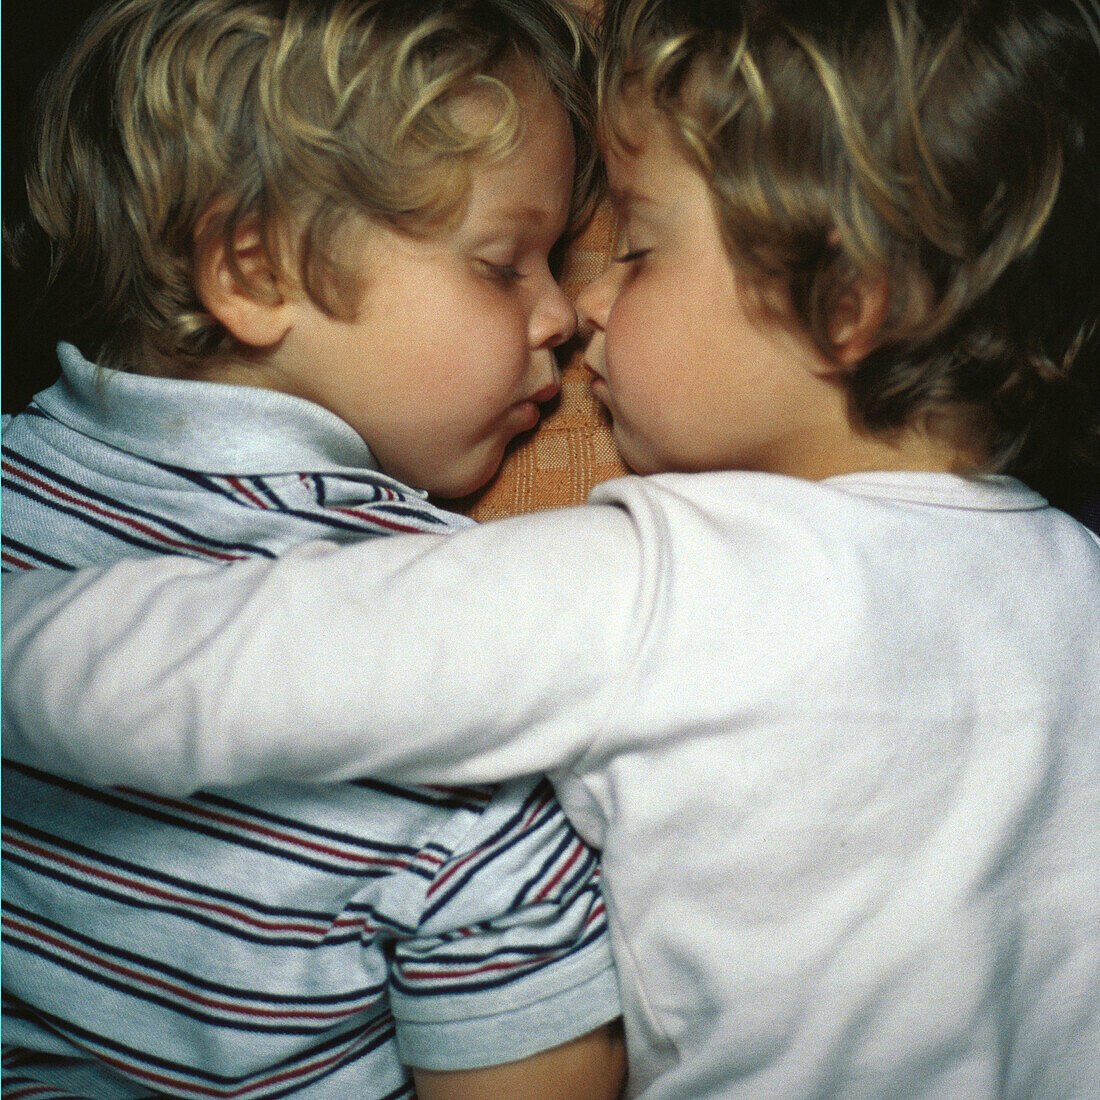 Two children sleeping, face to face, one with arm around the other